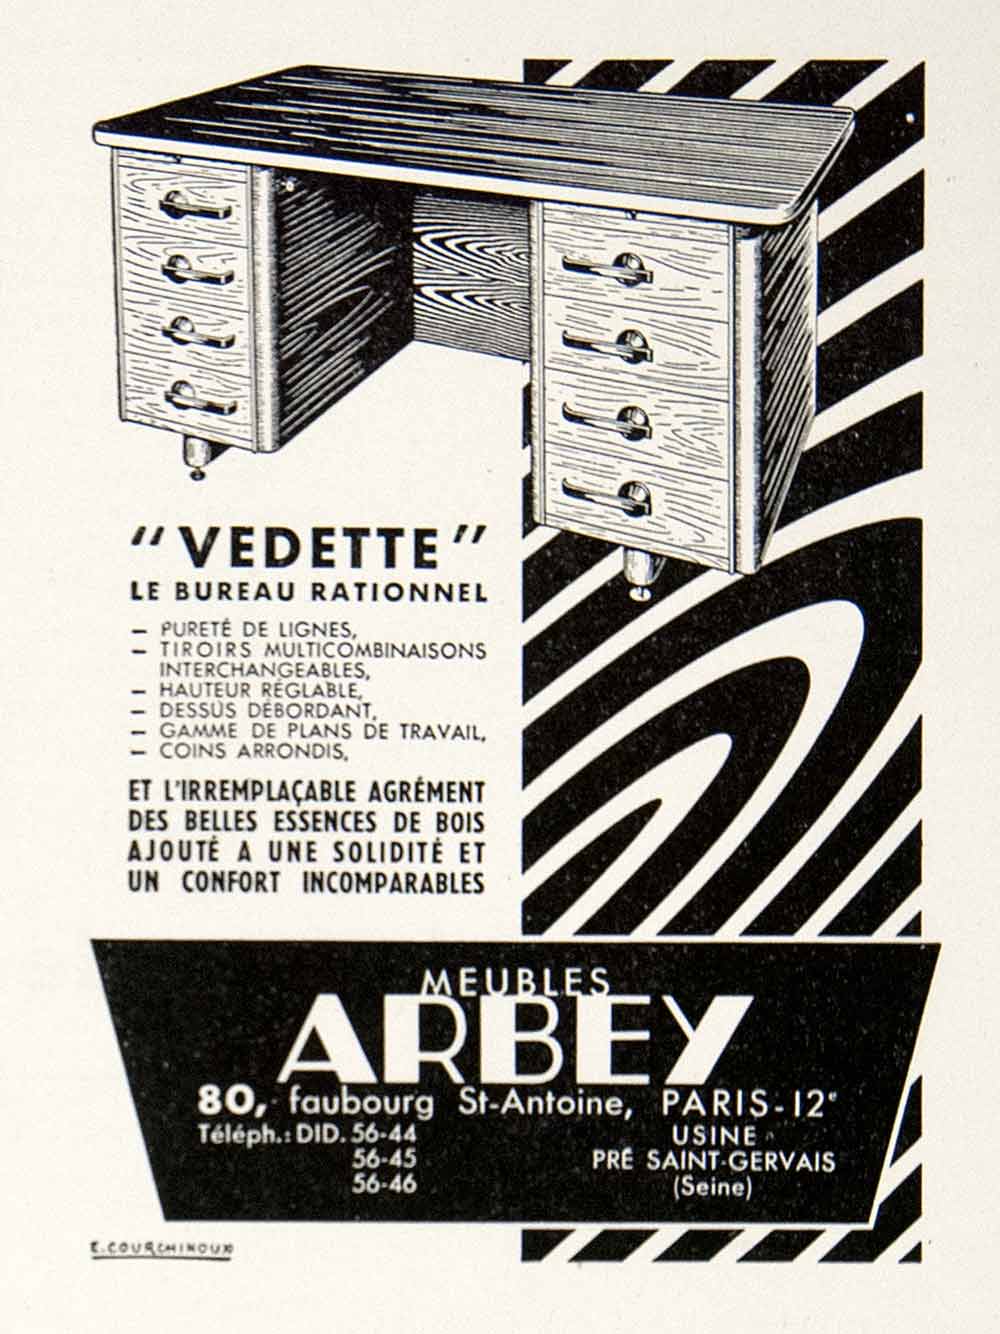 1953 Ad Arbey Office Furniture Vedette 80 Faubourg St Antoine French Desk VEN8